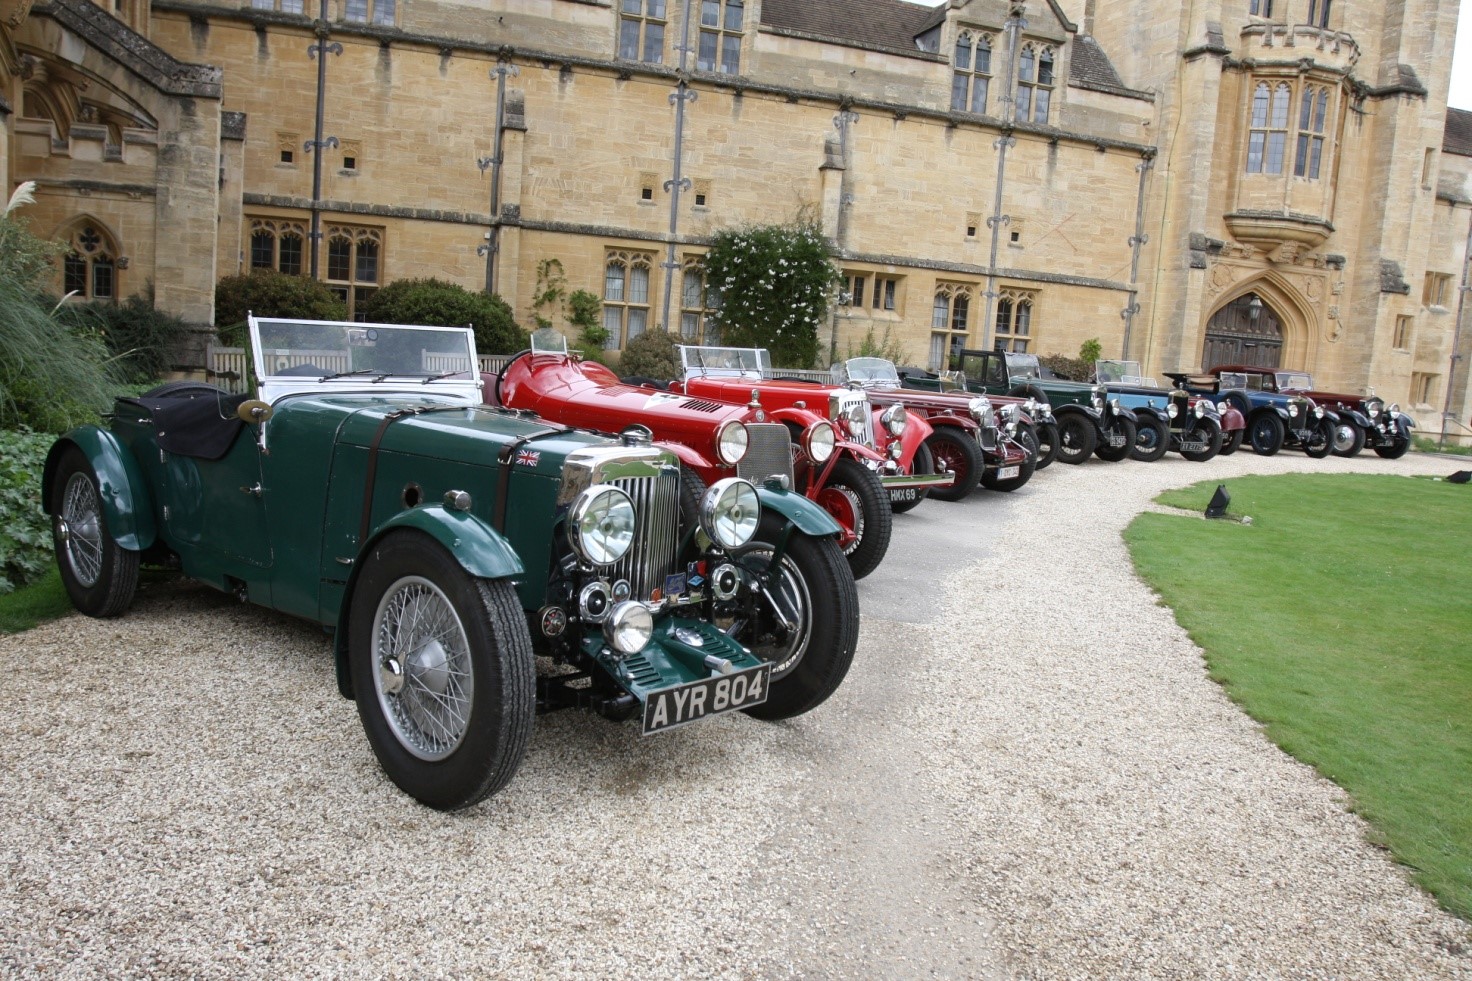 The Oxford Concours D